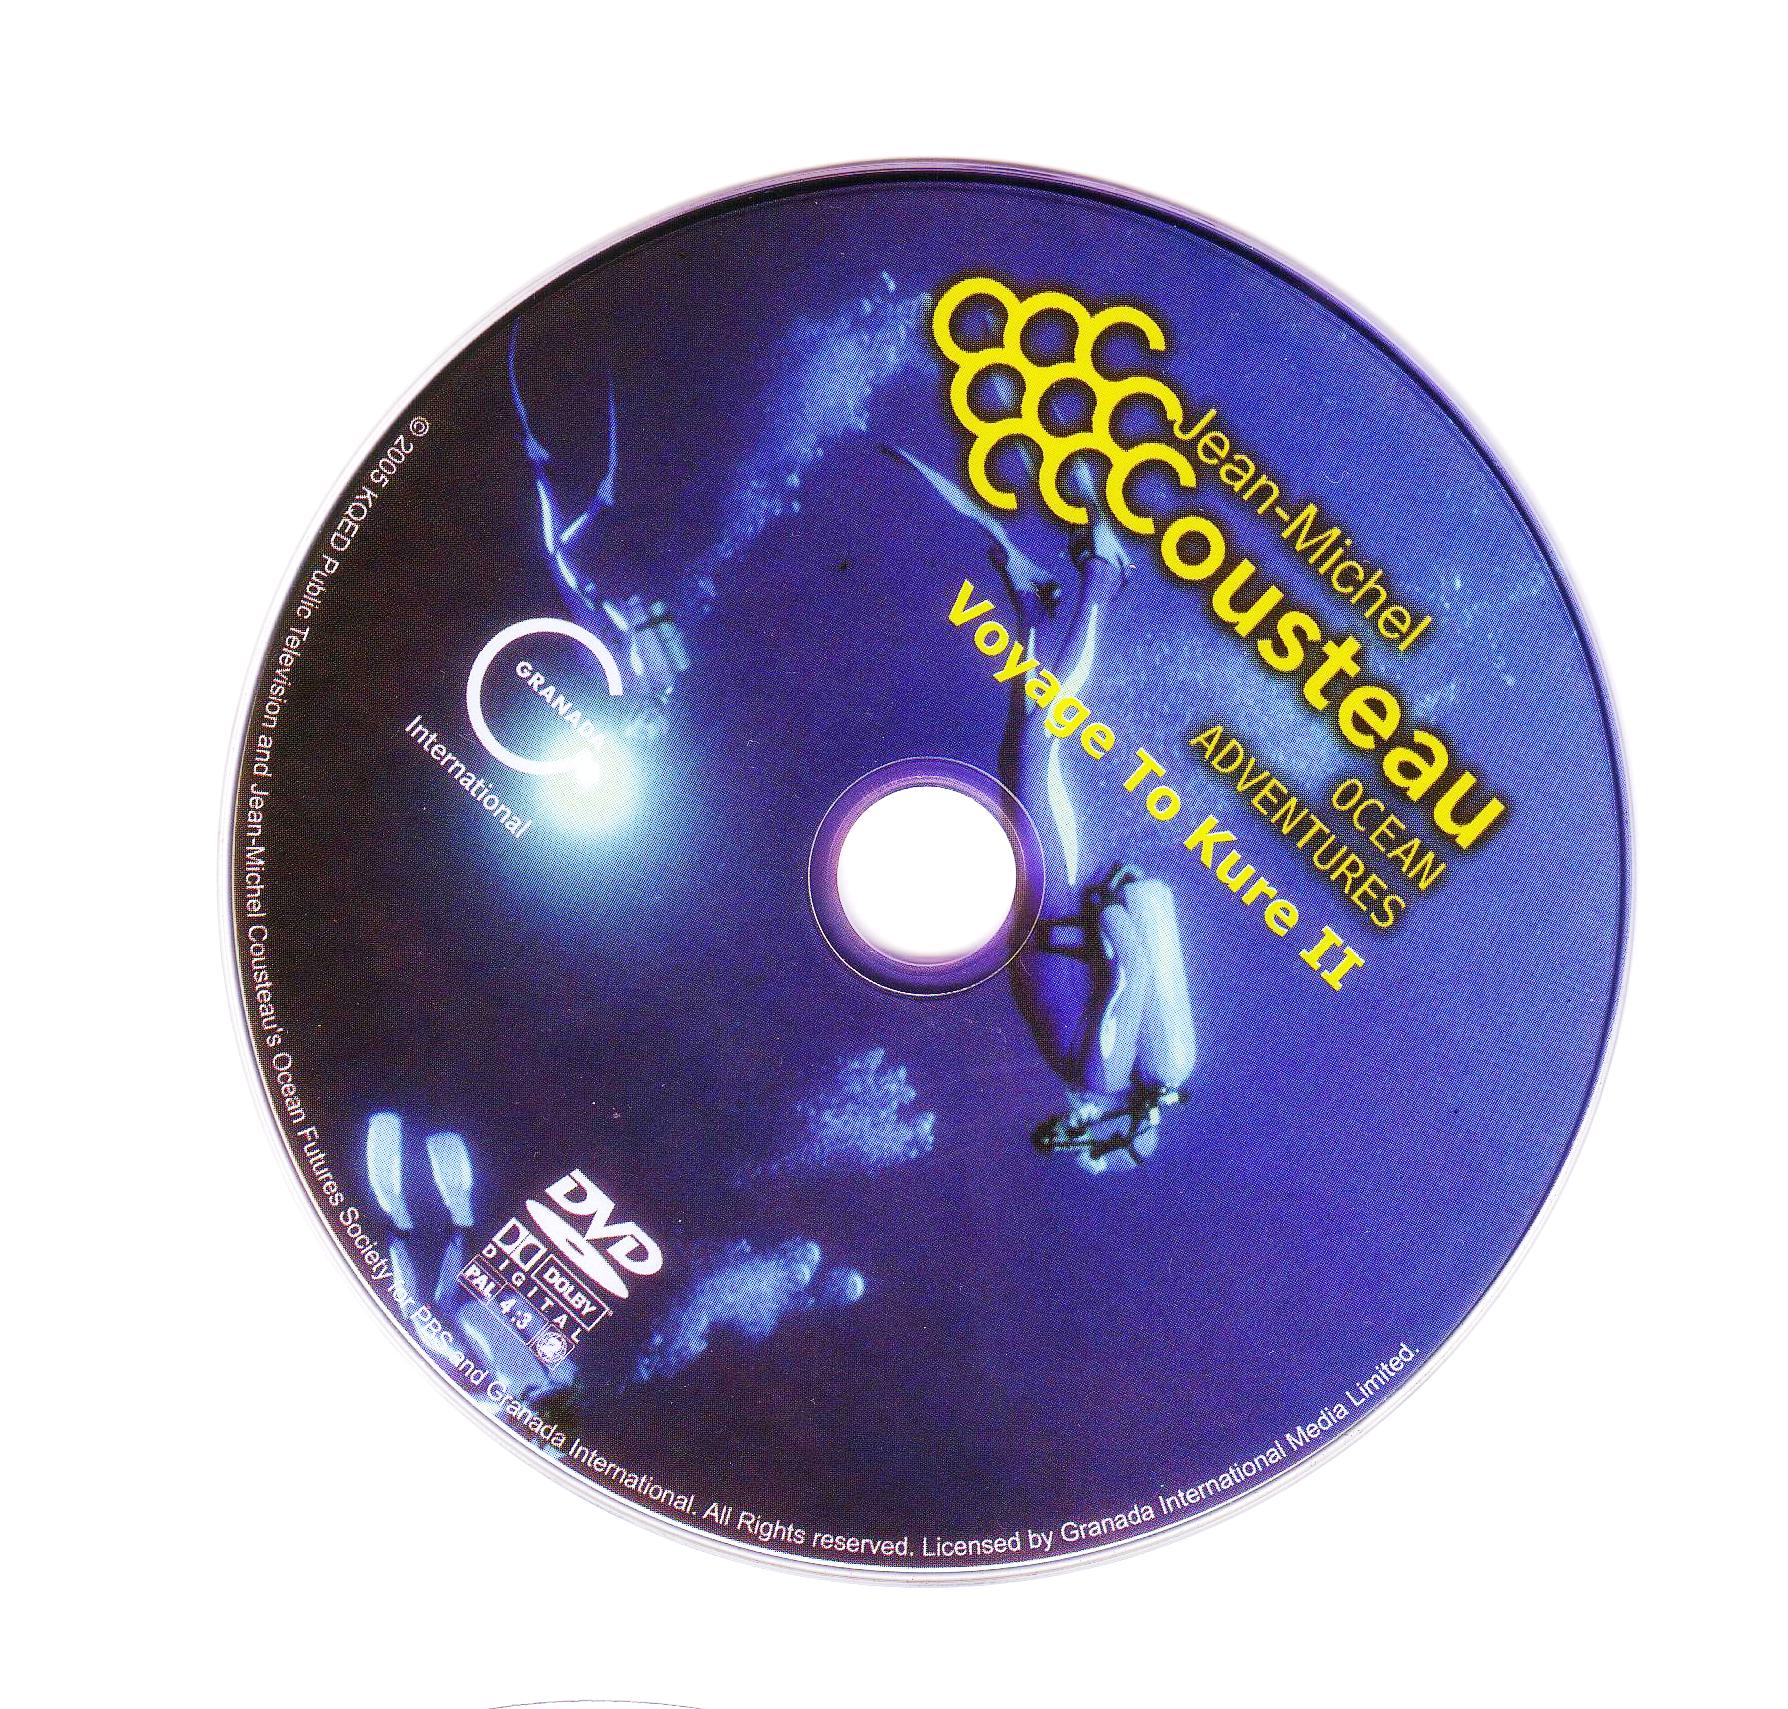 Click to view full size image -  DVD Cover - O - DVD - OCEANSKE PUSTOLOVINE DVD2  - CD - DVD - OCEANSKE PUSTOLOVINE DVD2  - CD.jpg